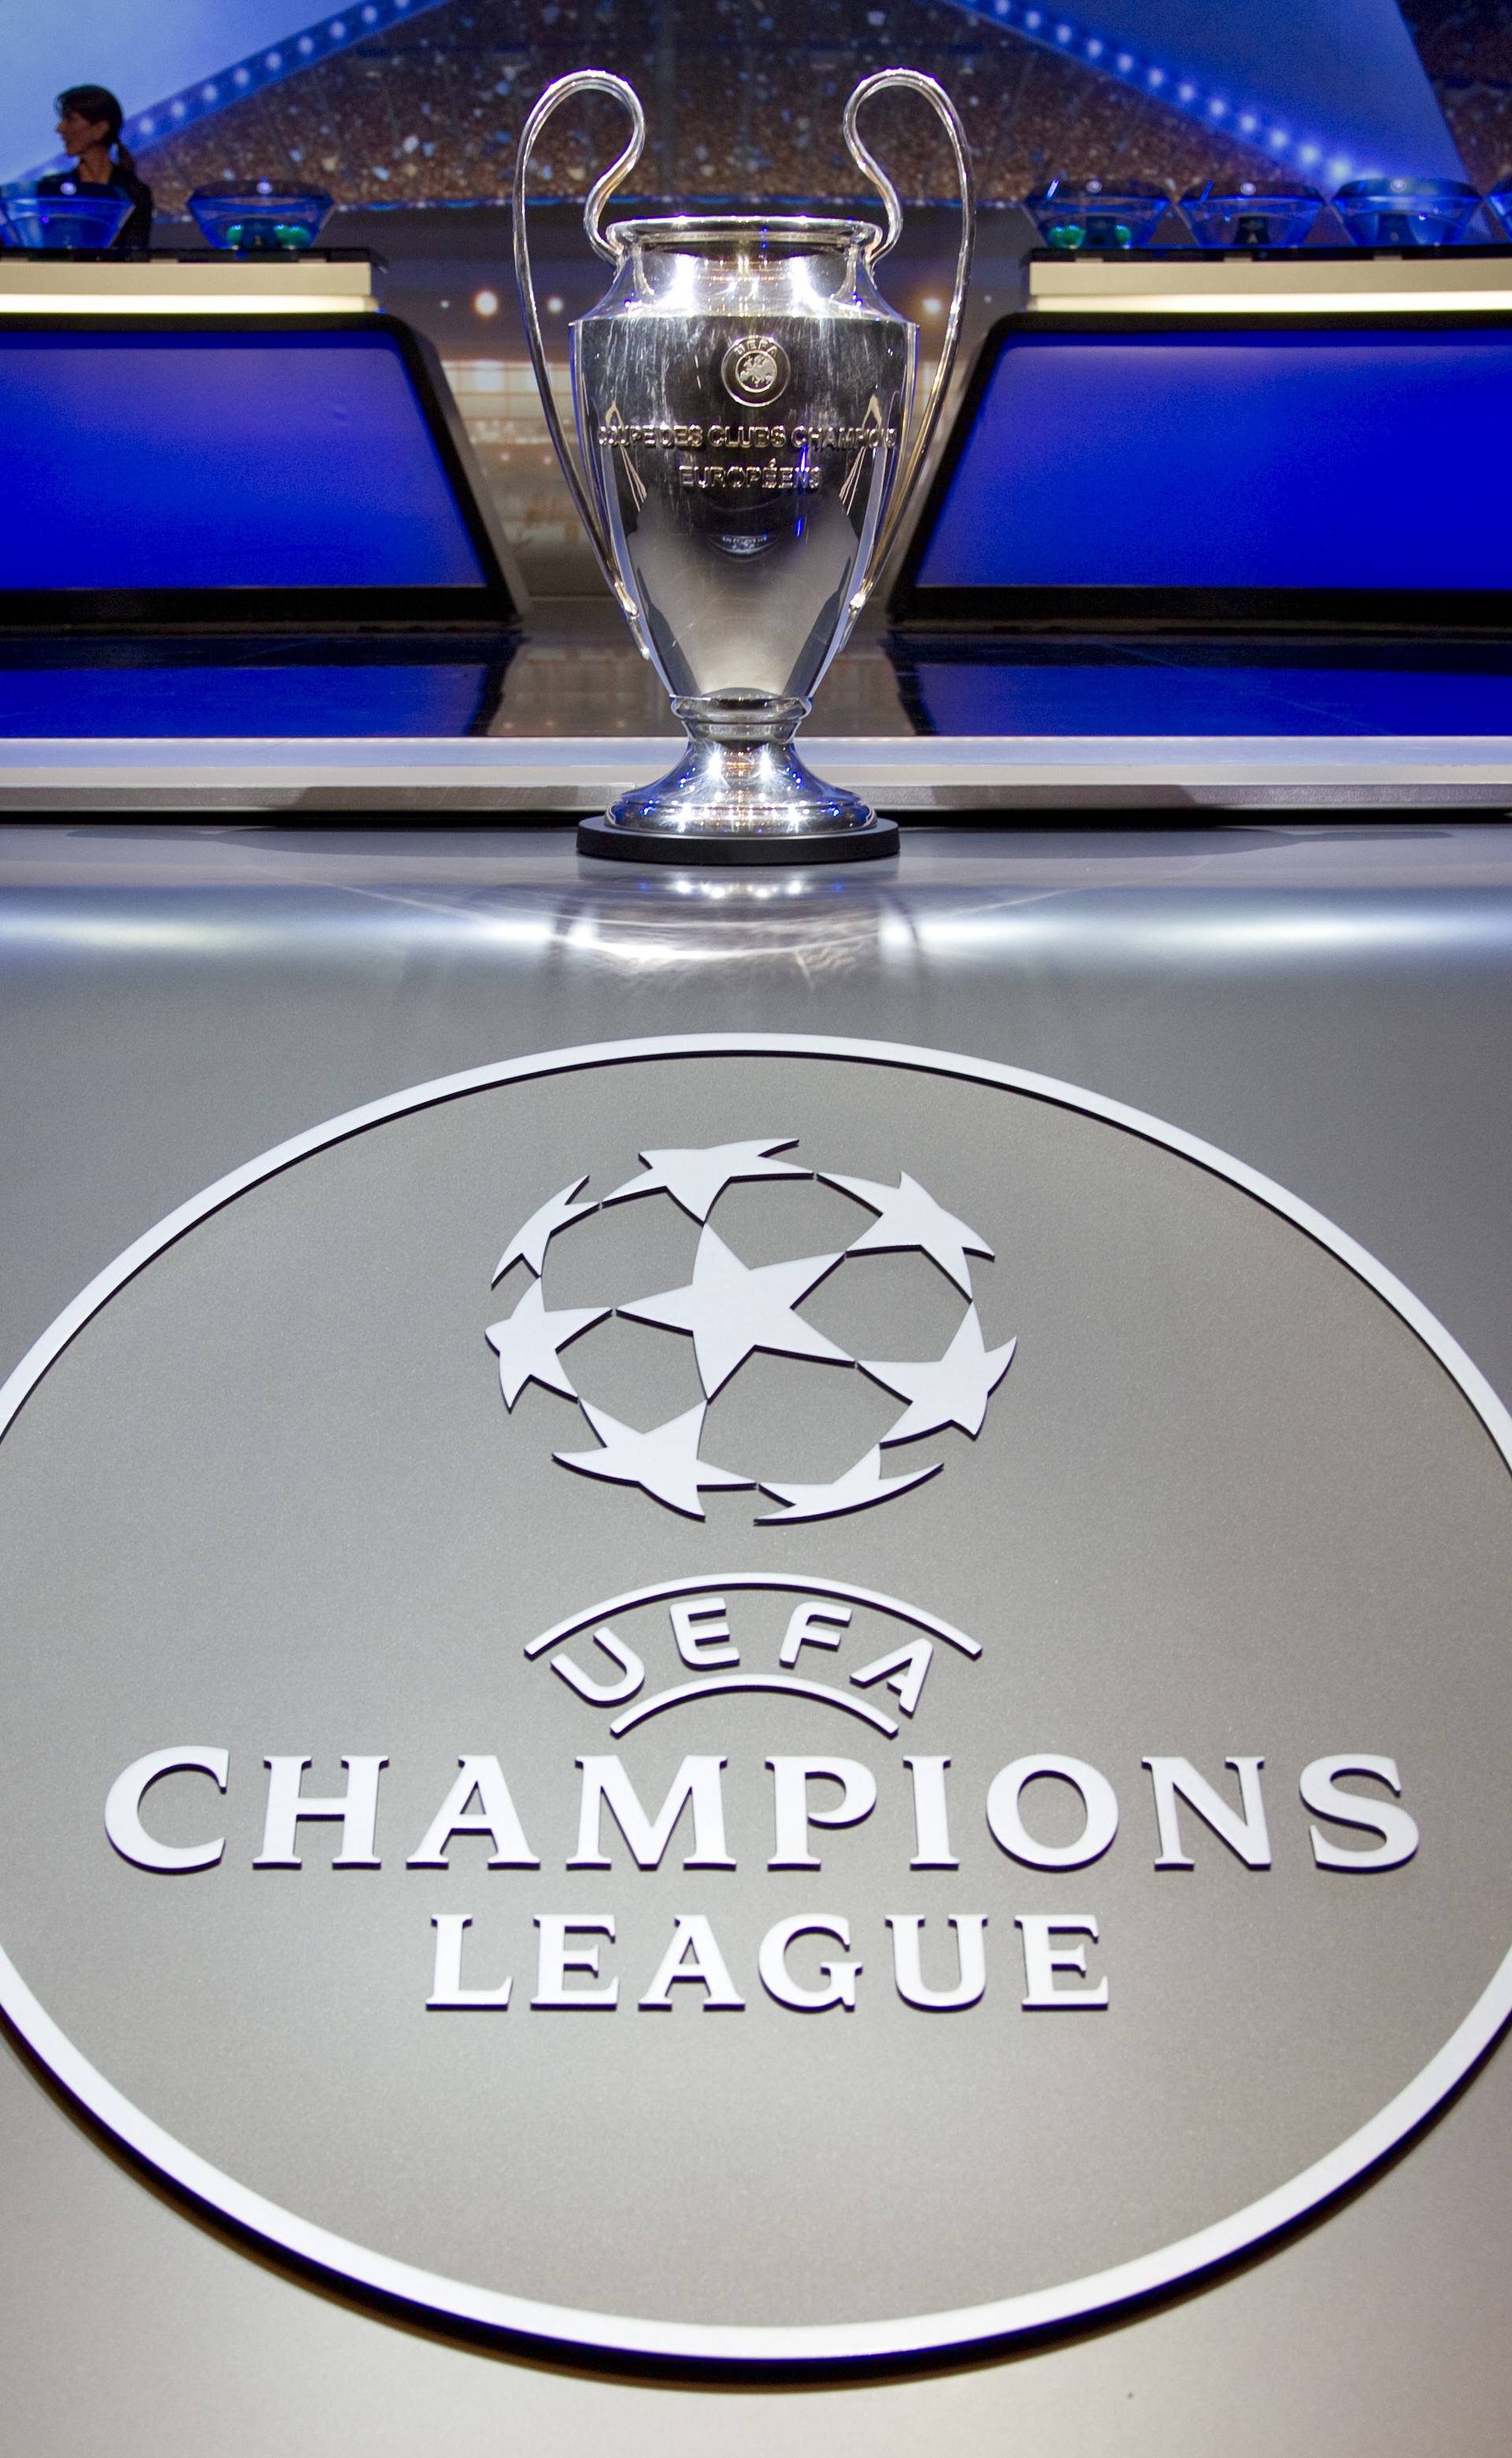 UEFA Champions League Group Stage Draw in Monaco